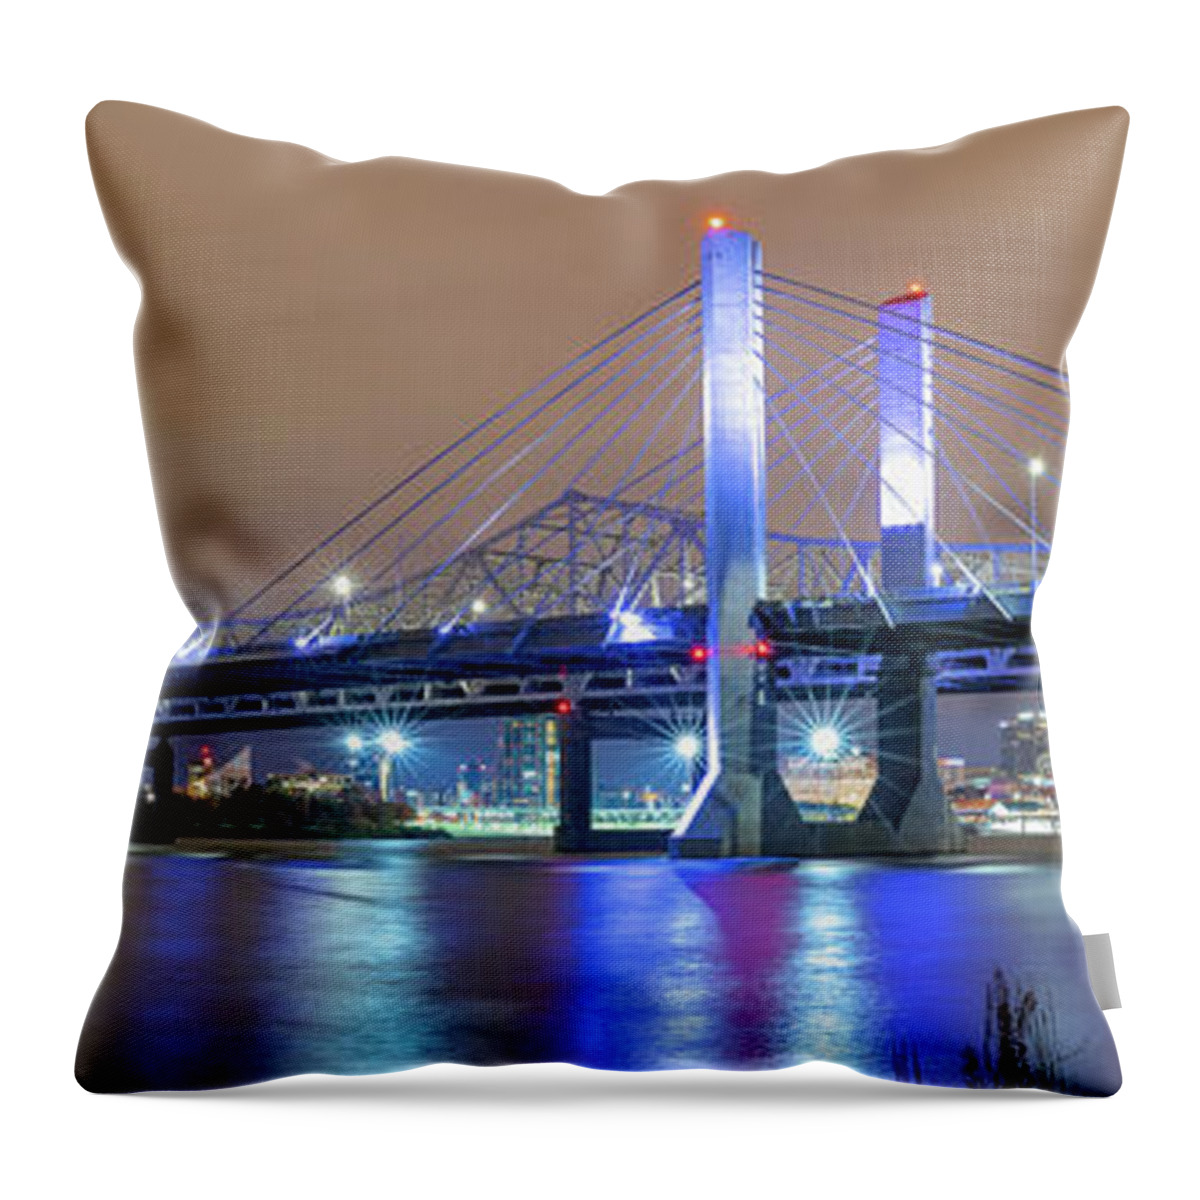 Reflection Throw Pillow featuring the photograph Ohio Reflections by Rod Best